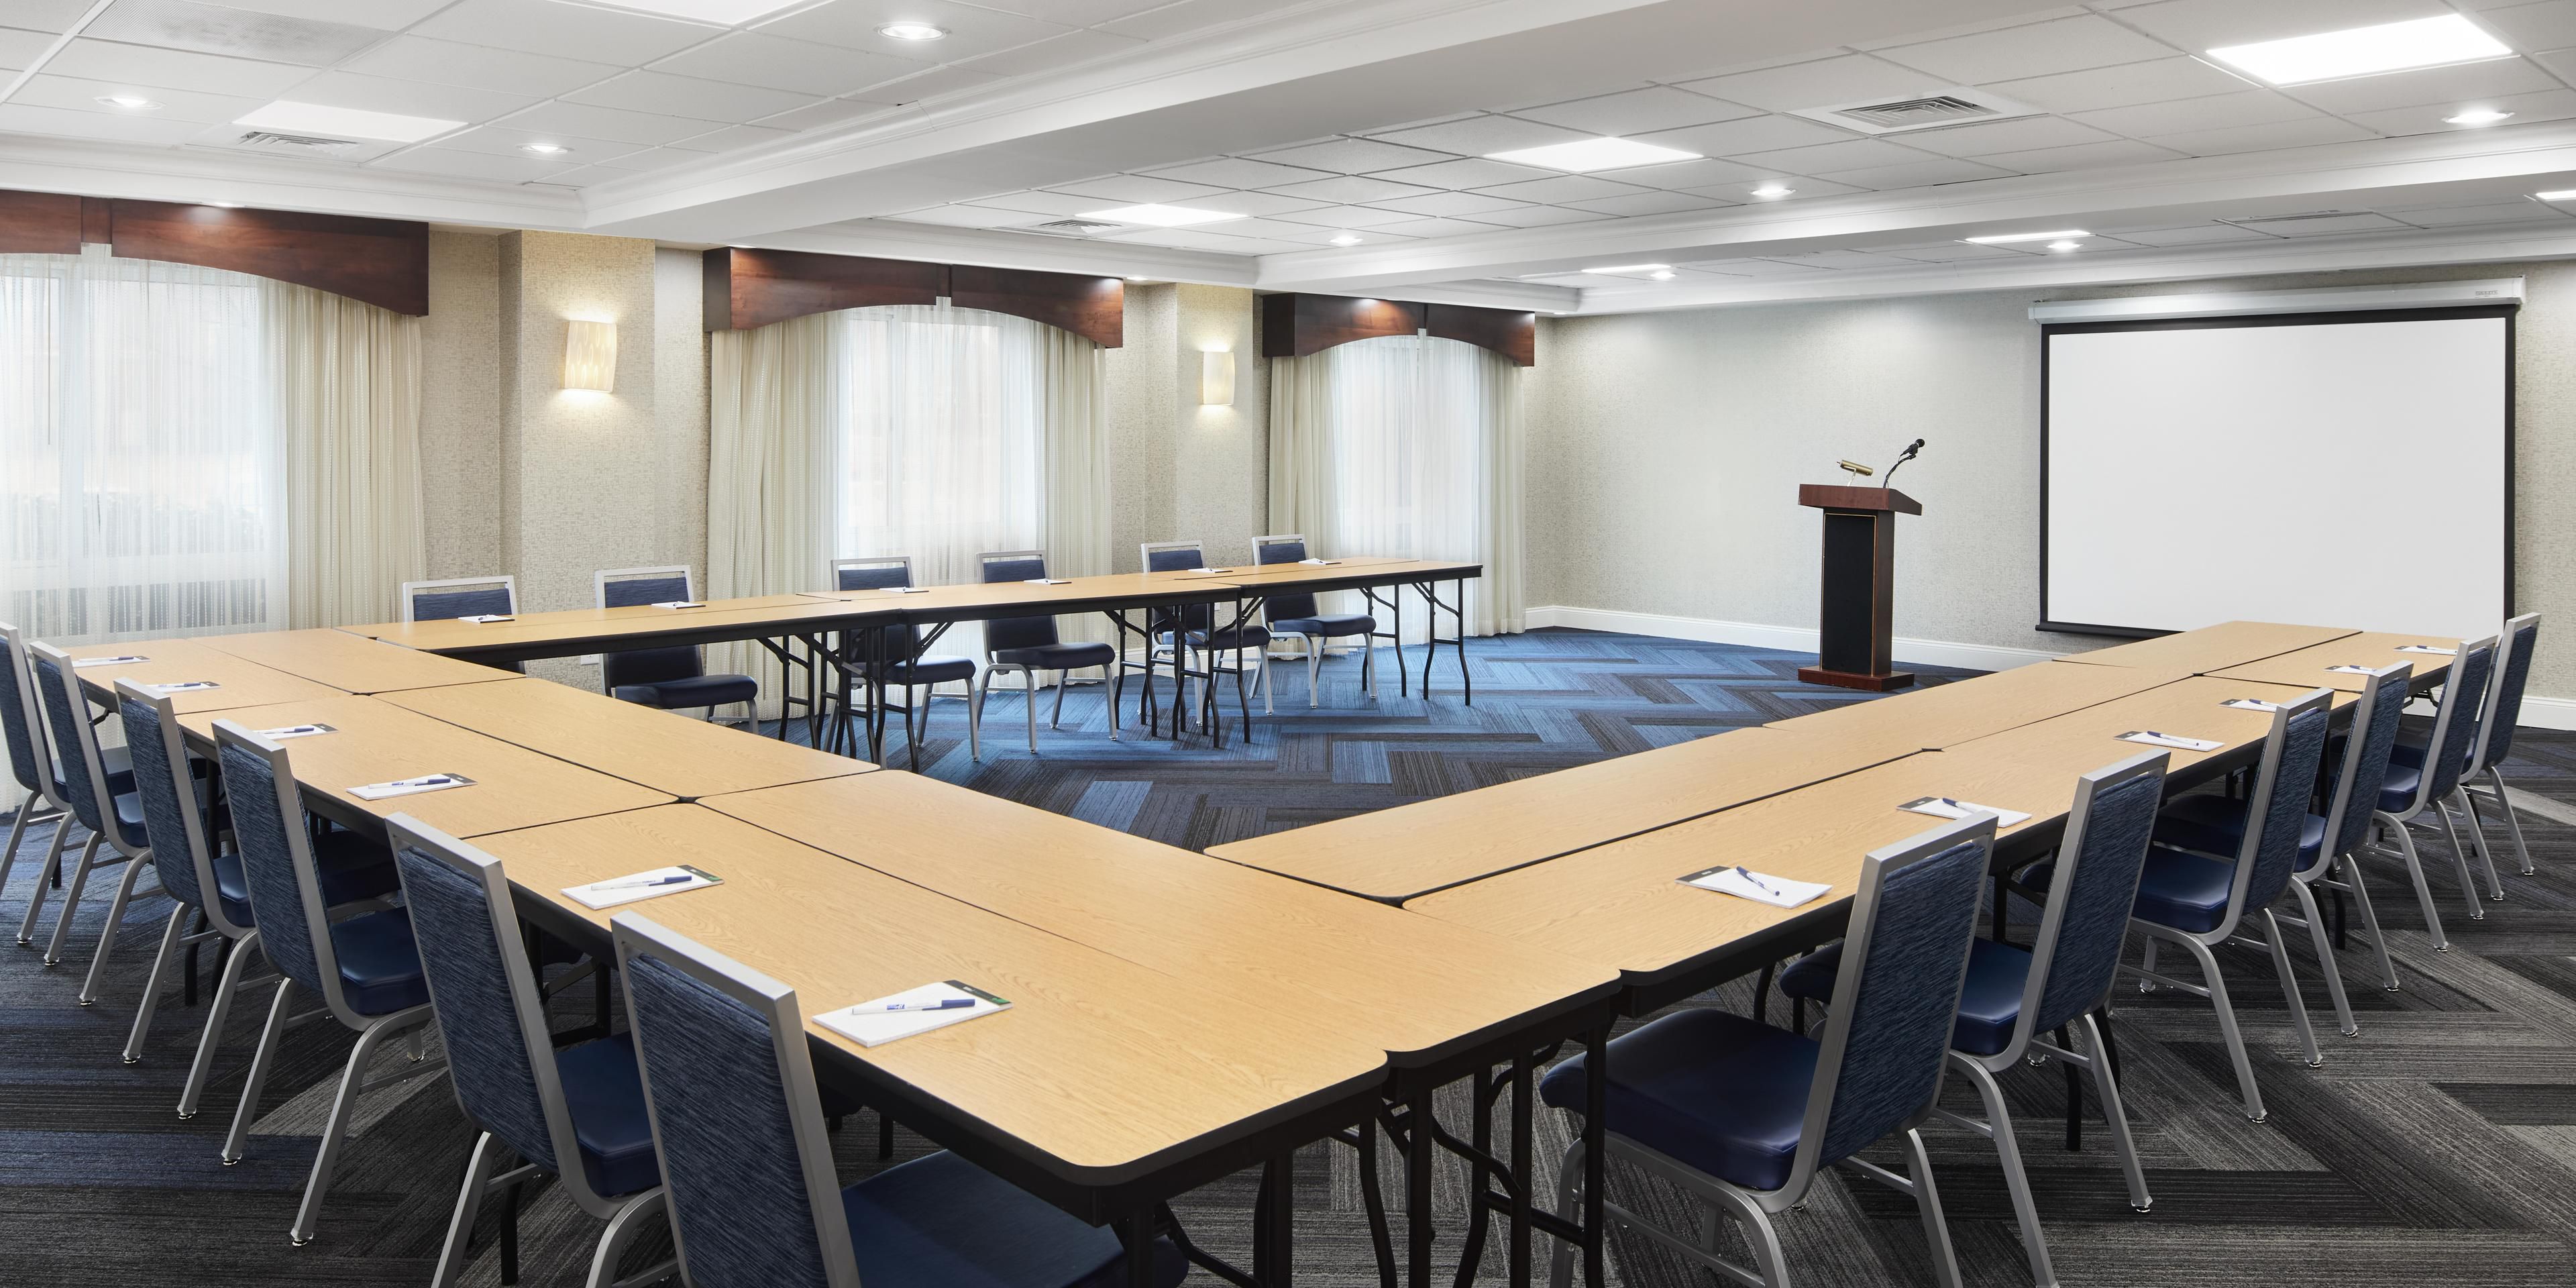 Over 1044 SF of combined meeting space. Own catering welcome. **DUE TO COVID-19, SEATING CAPACITY RESTRICTIONS APPLY**